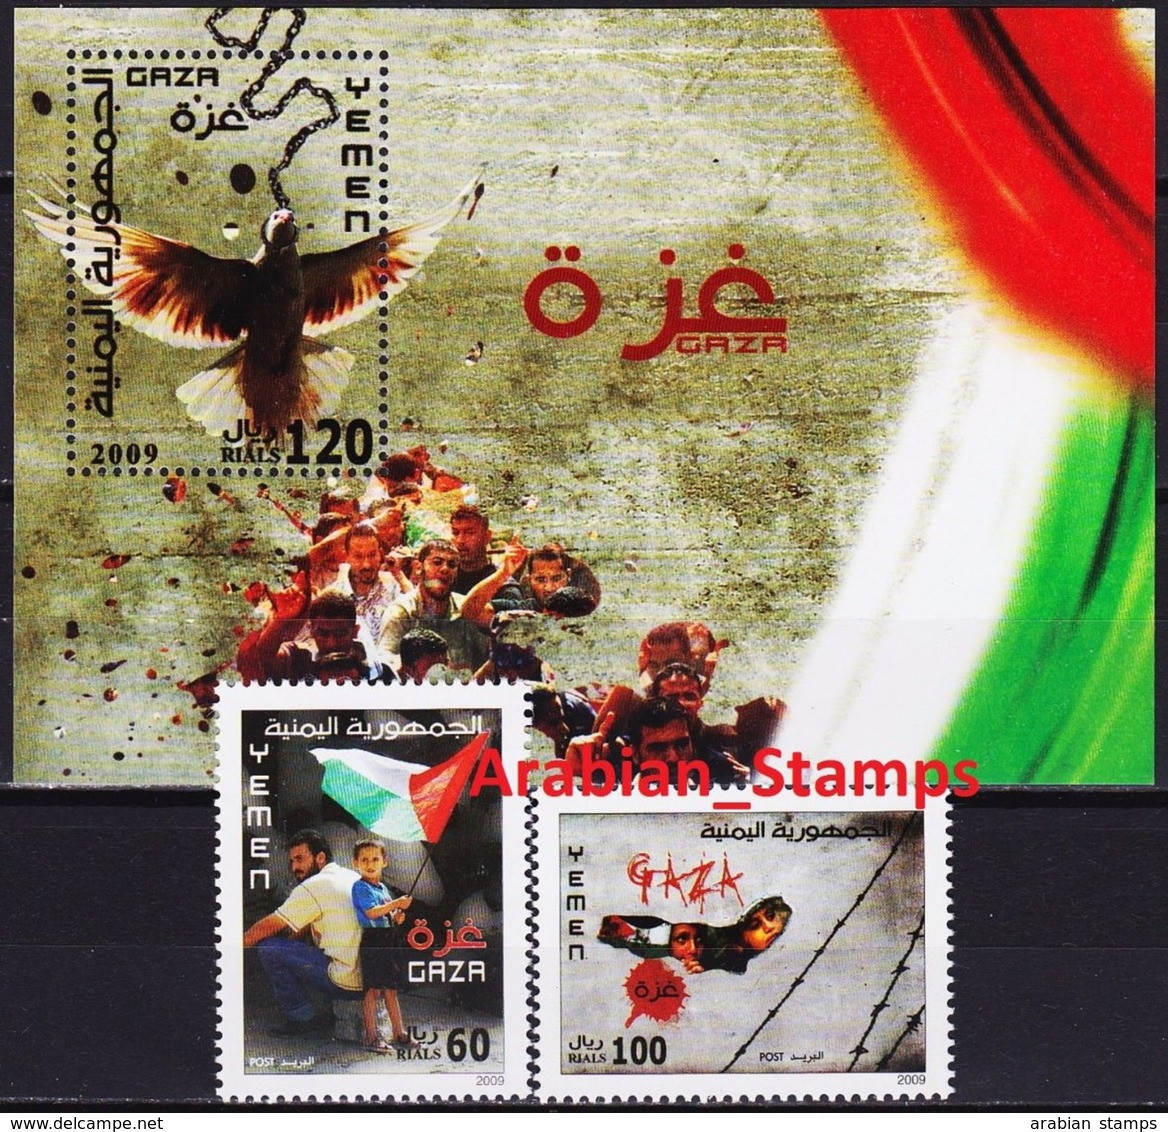 YEMEN REPUBLIC 2009 MNH PALESTINIAN SOLIDARITY PALESTINE CHILDREN IN GAZA FLAG DOVE CHAIN JOINT ISSUE - Joint Issues